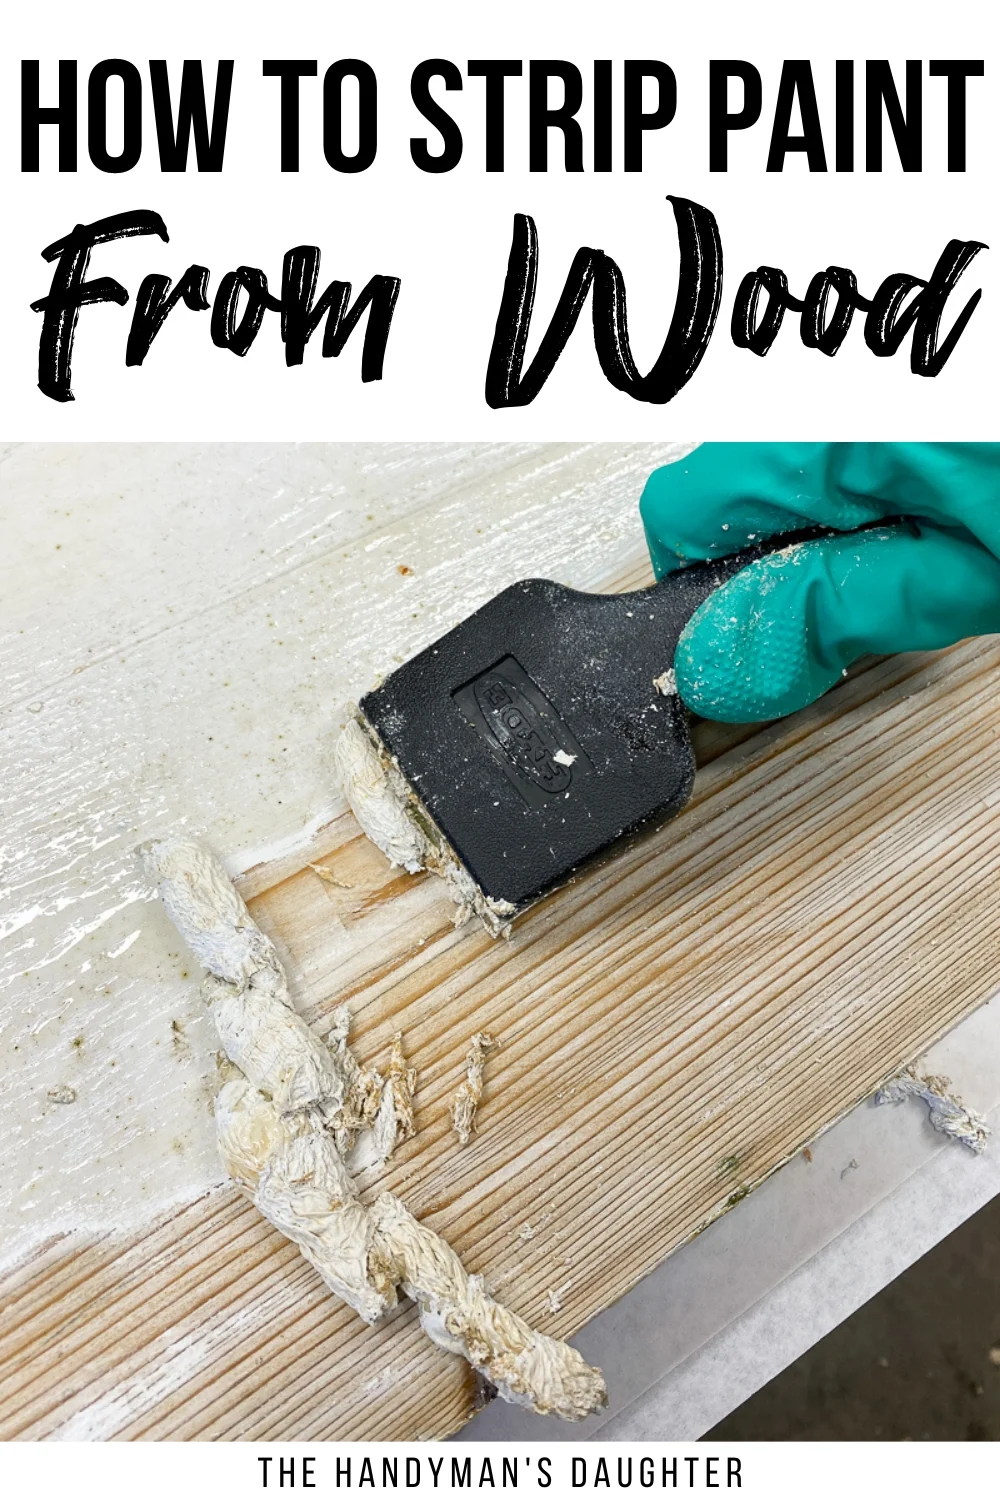 Learn how to strip paint from wood in this tutorial